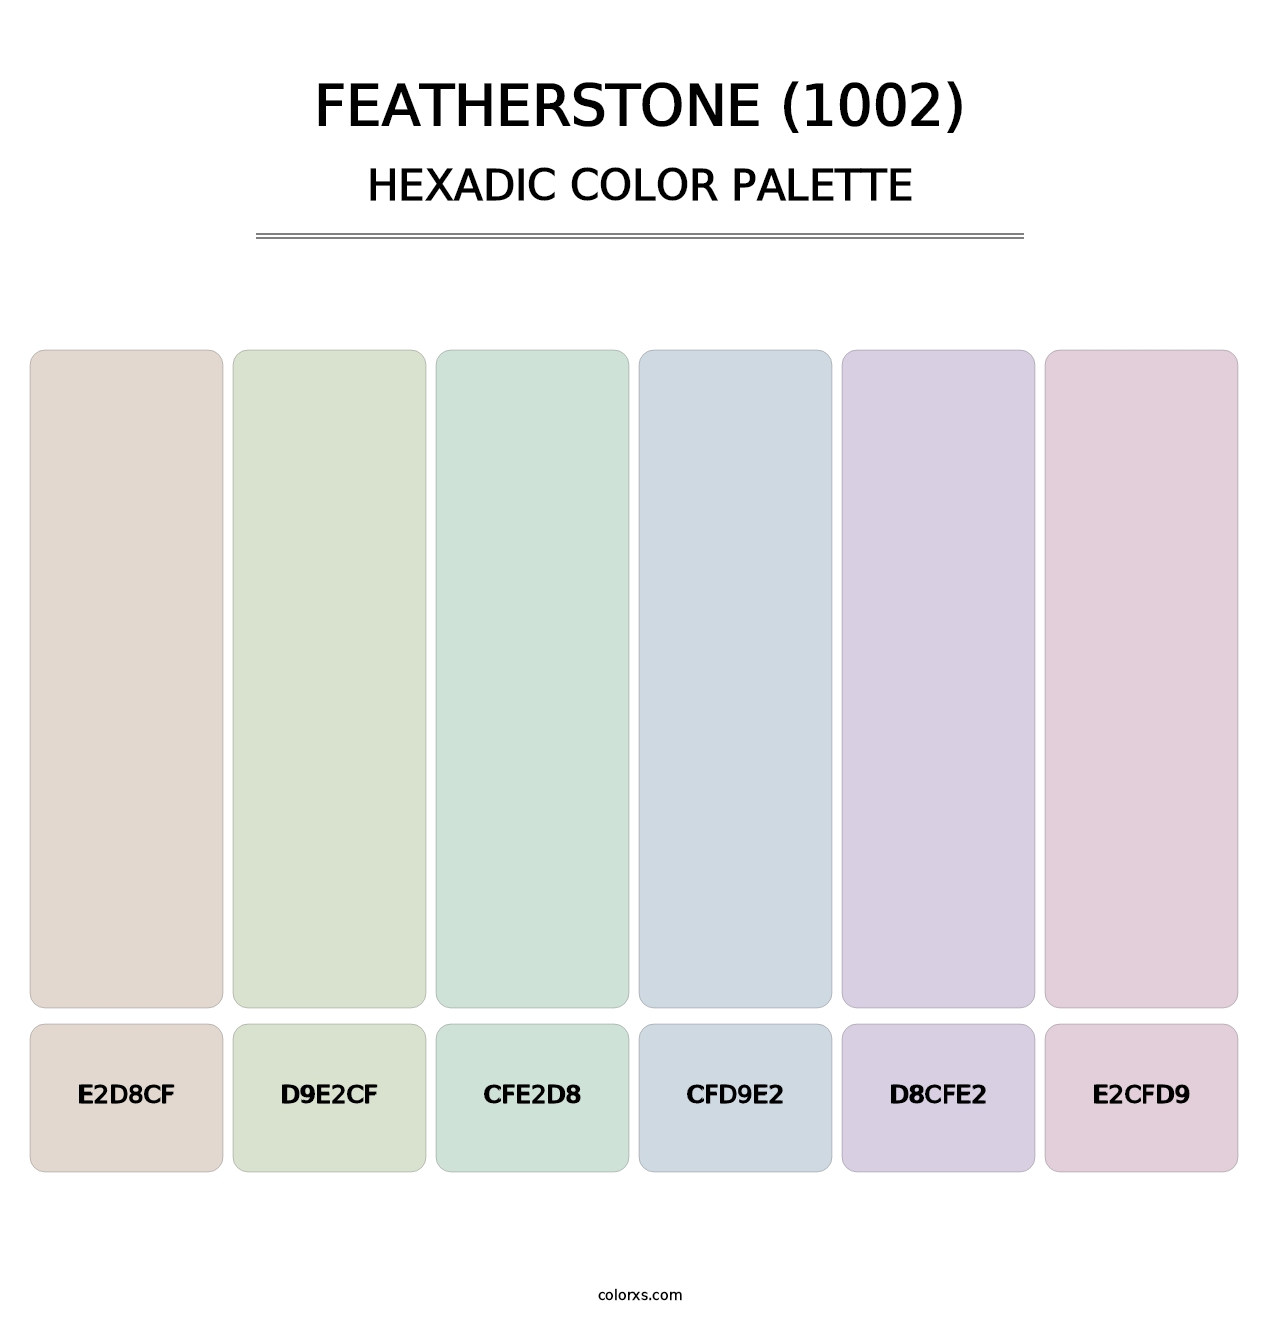 Featherstone (1002) - Hexadic Color Palette